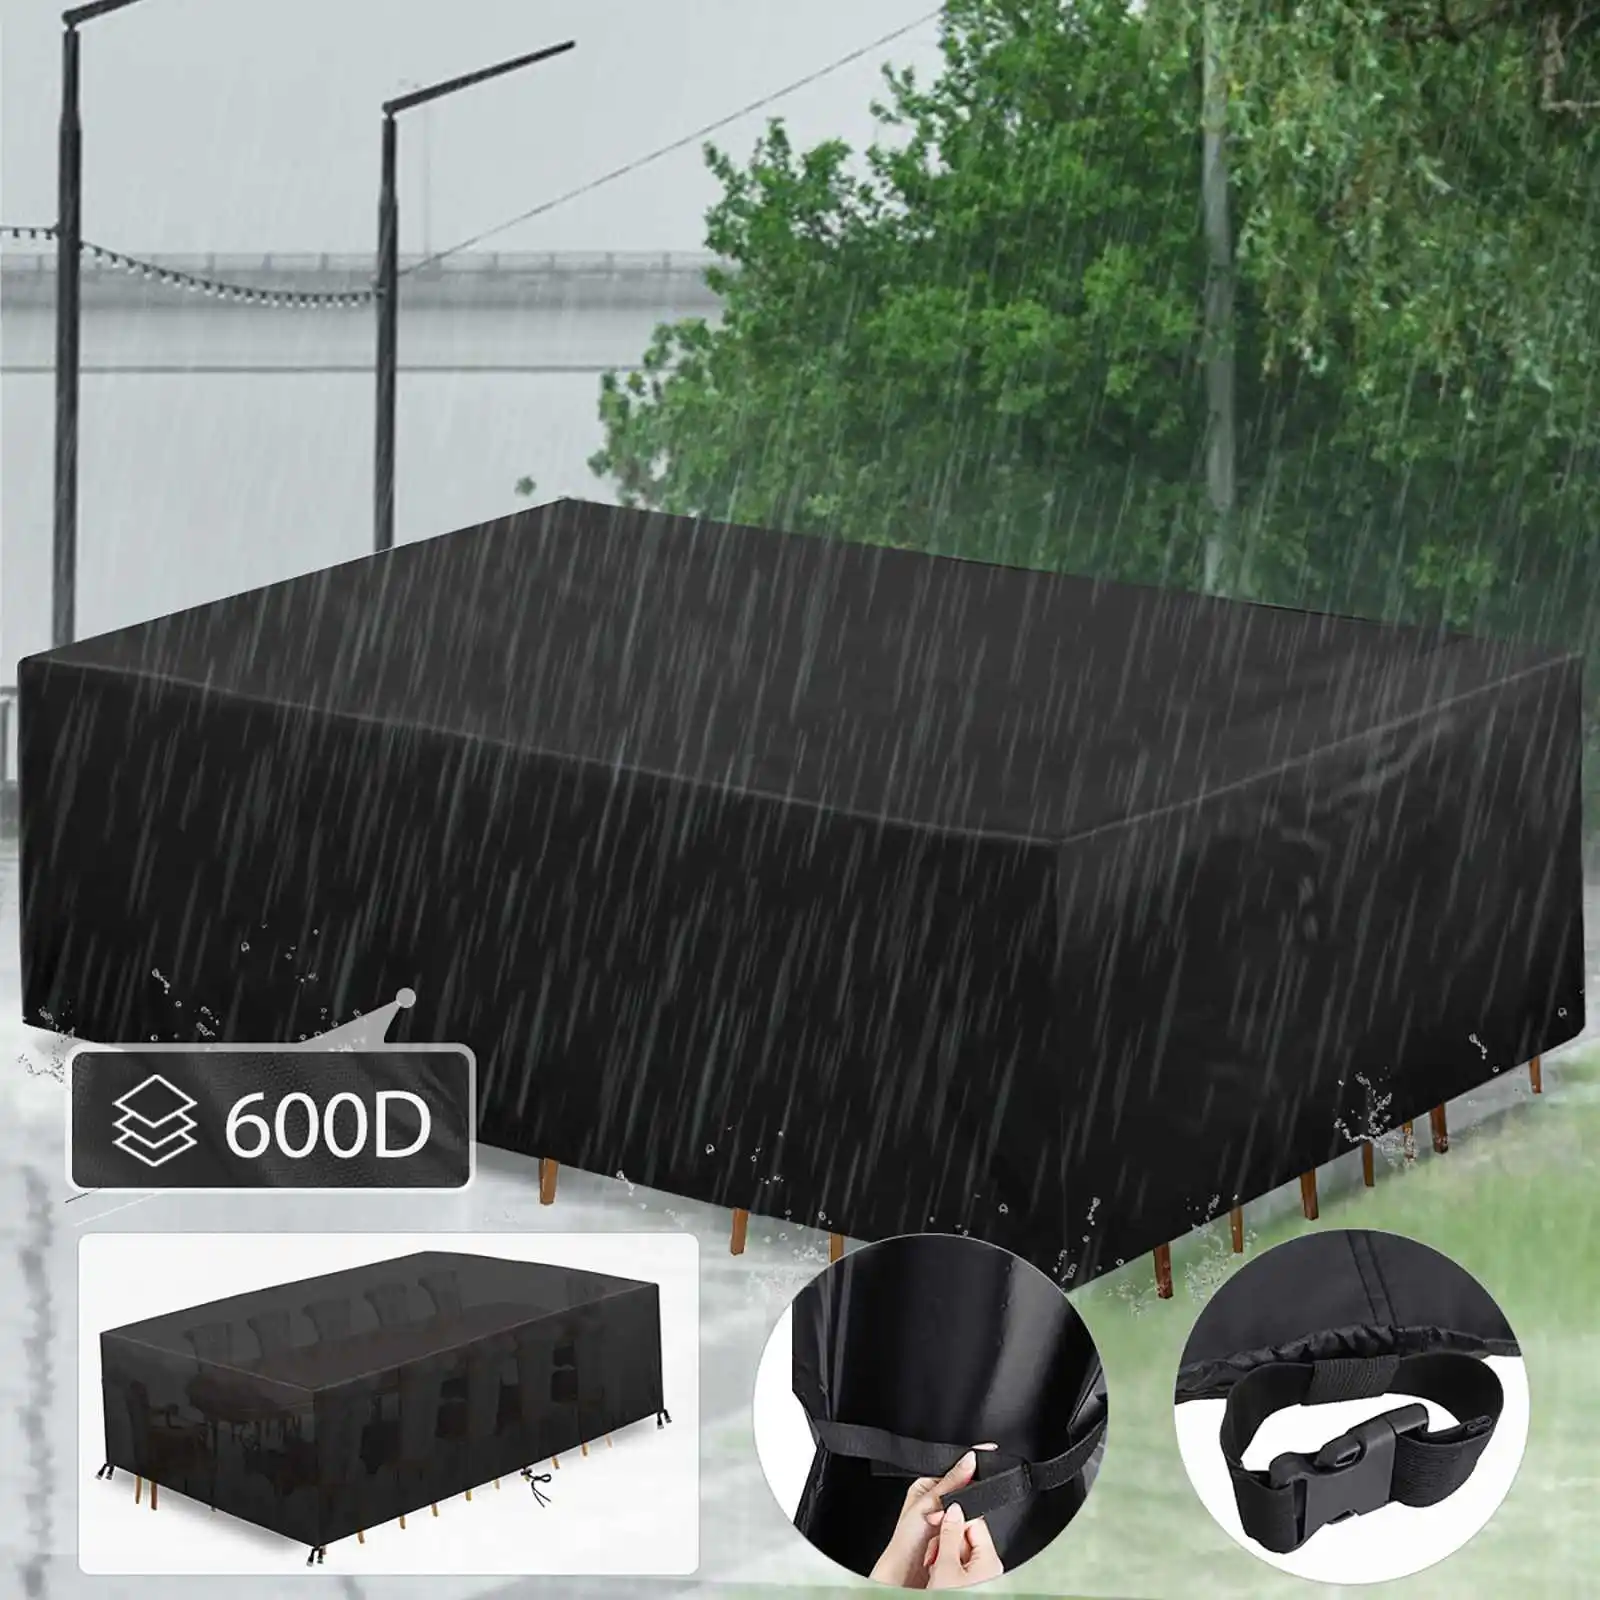 

Oxford Polyester Furniture Dustproof Cover For Rattan Table Cube Chair Sofa Waterproof Garden Patio Protective Rain Snow Cover